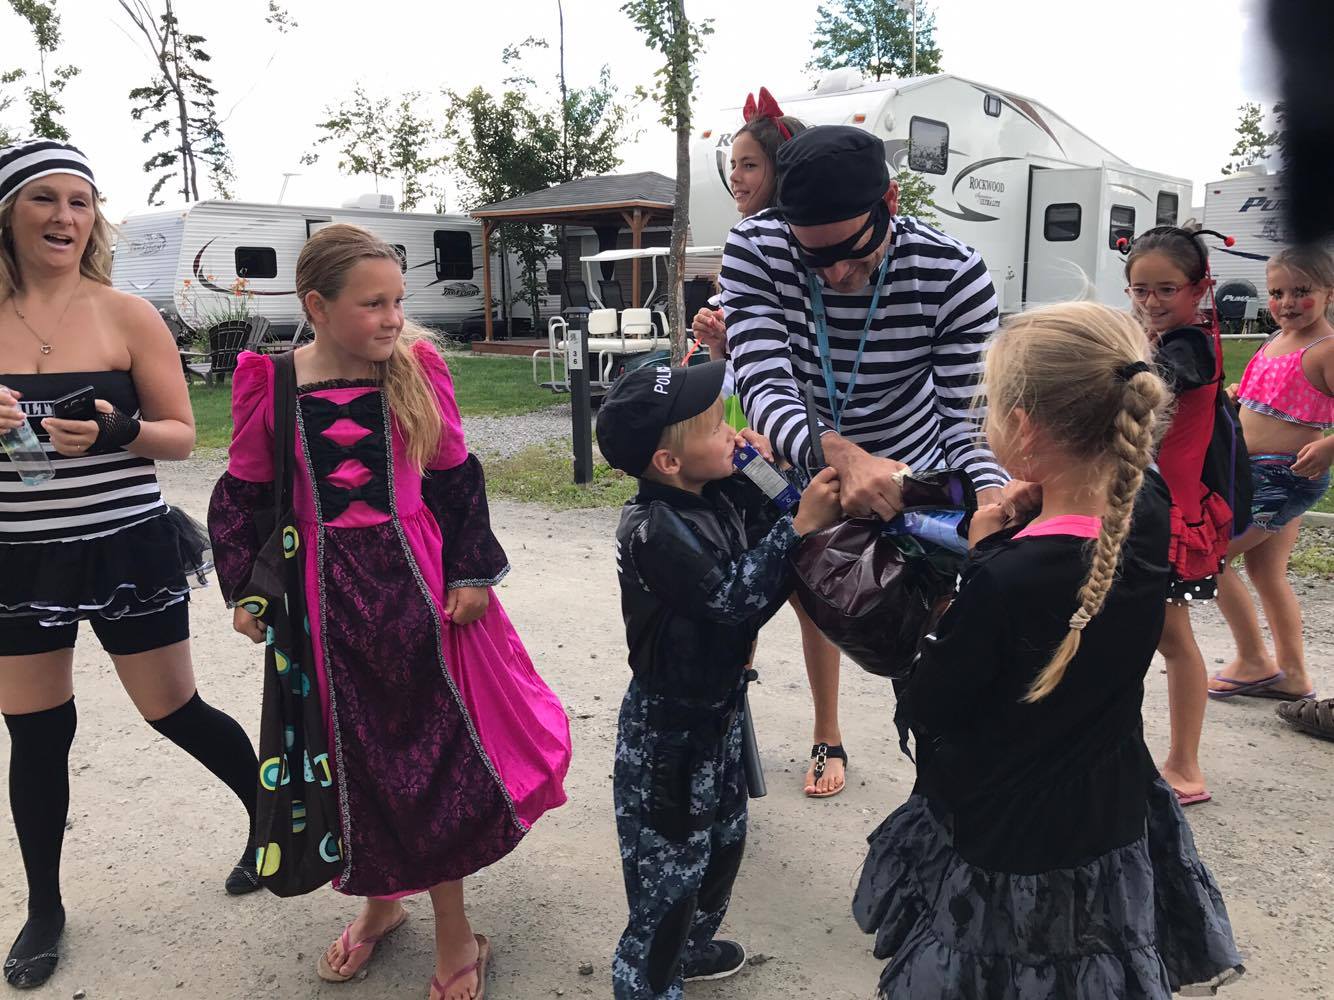 http://www.familycampgrounds.ca/wp-content/uploads/2017/08/halloween-2017-complexe-atlantide-17.jpg